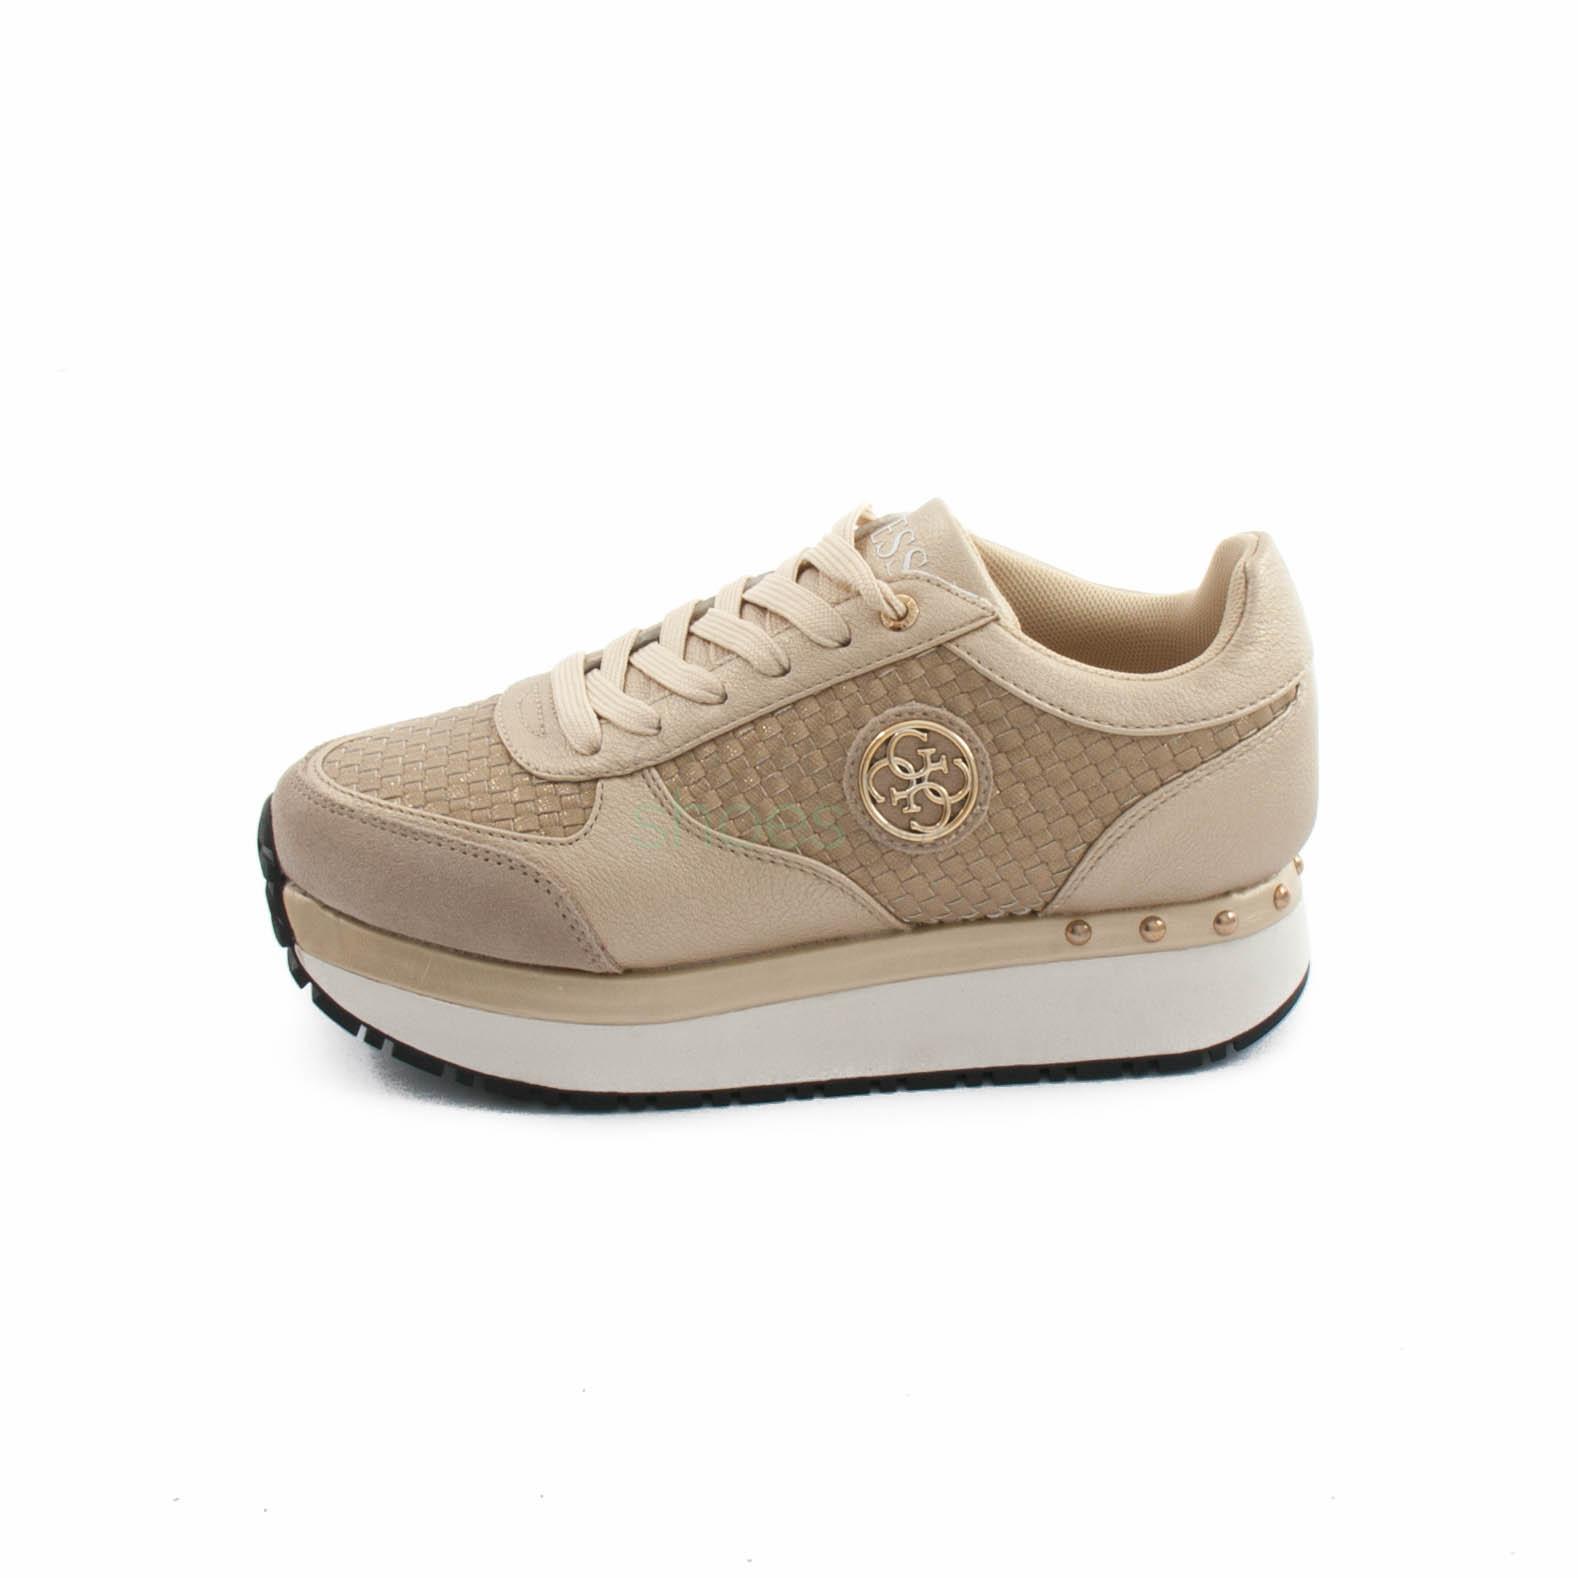 guess shoes gold sneakers